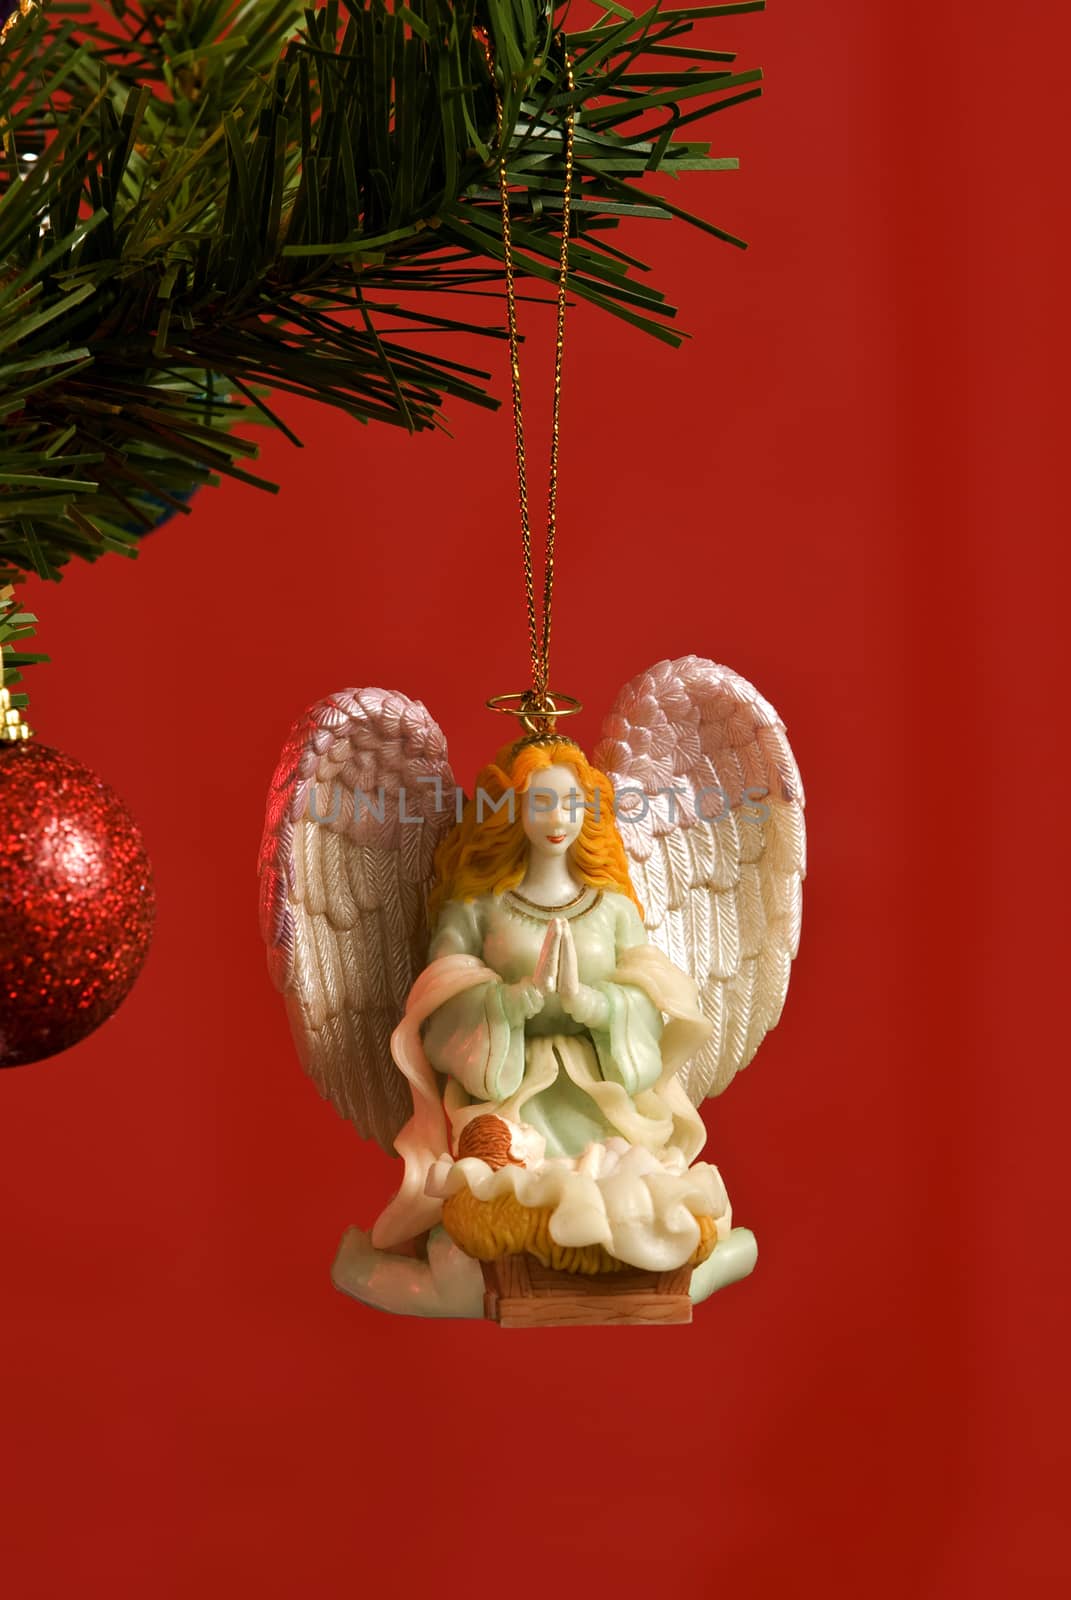 Christmas Tree Angel Ornament Vertical by stockbuster1